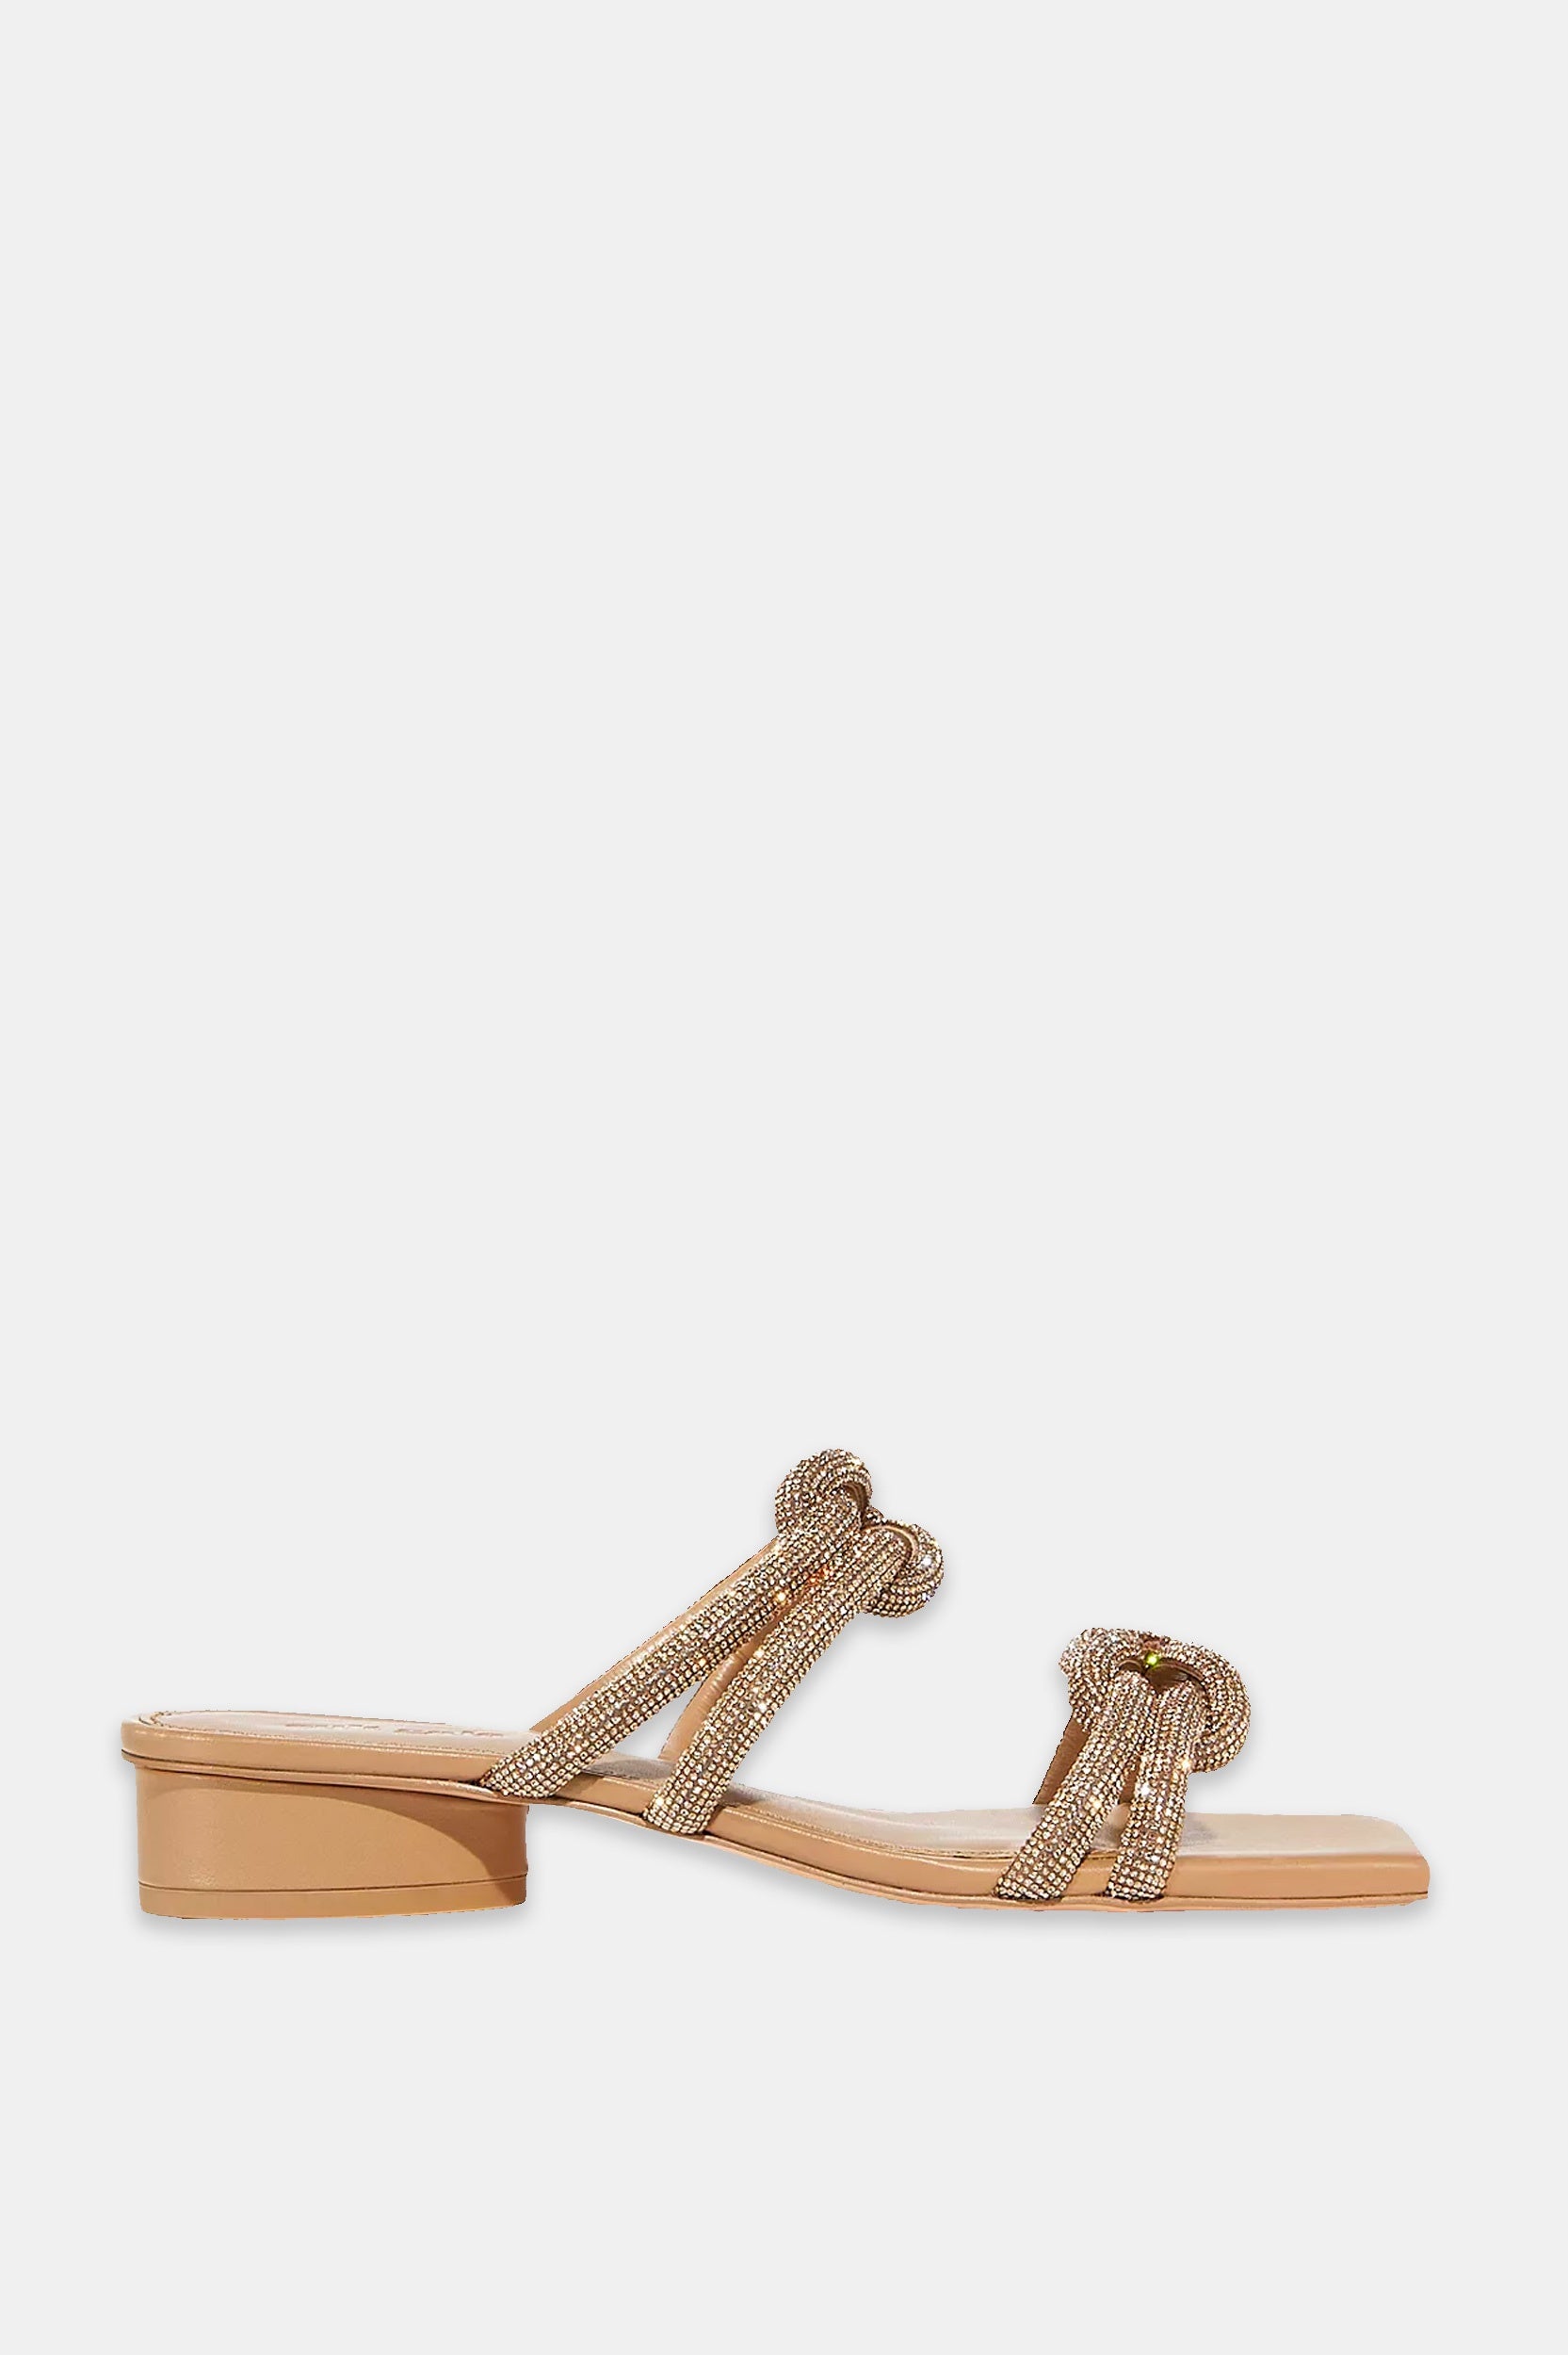 Jenny Knotted Sandal in Sand